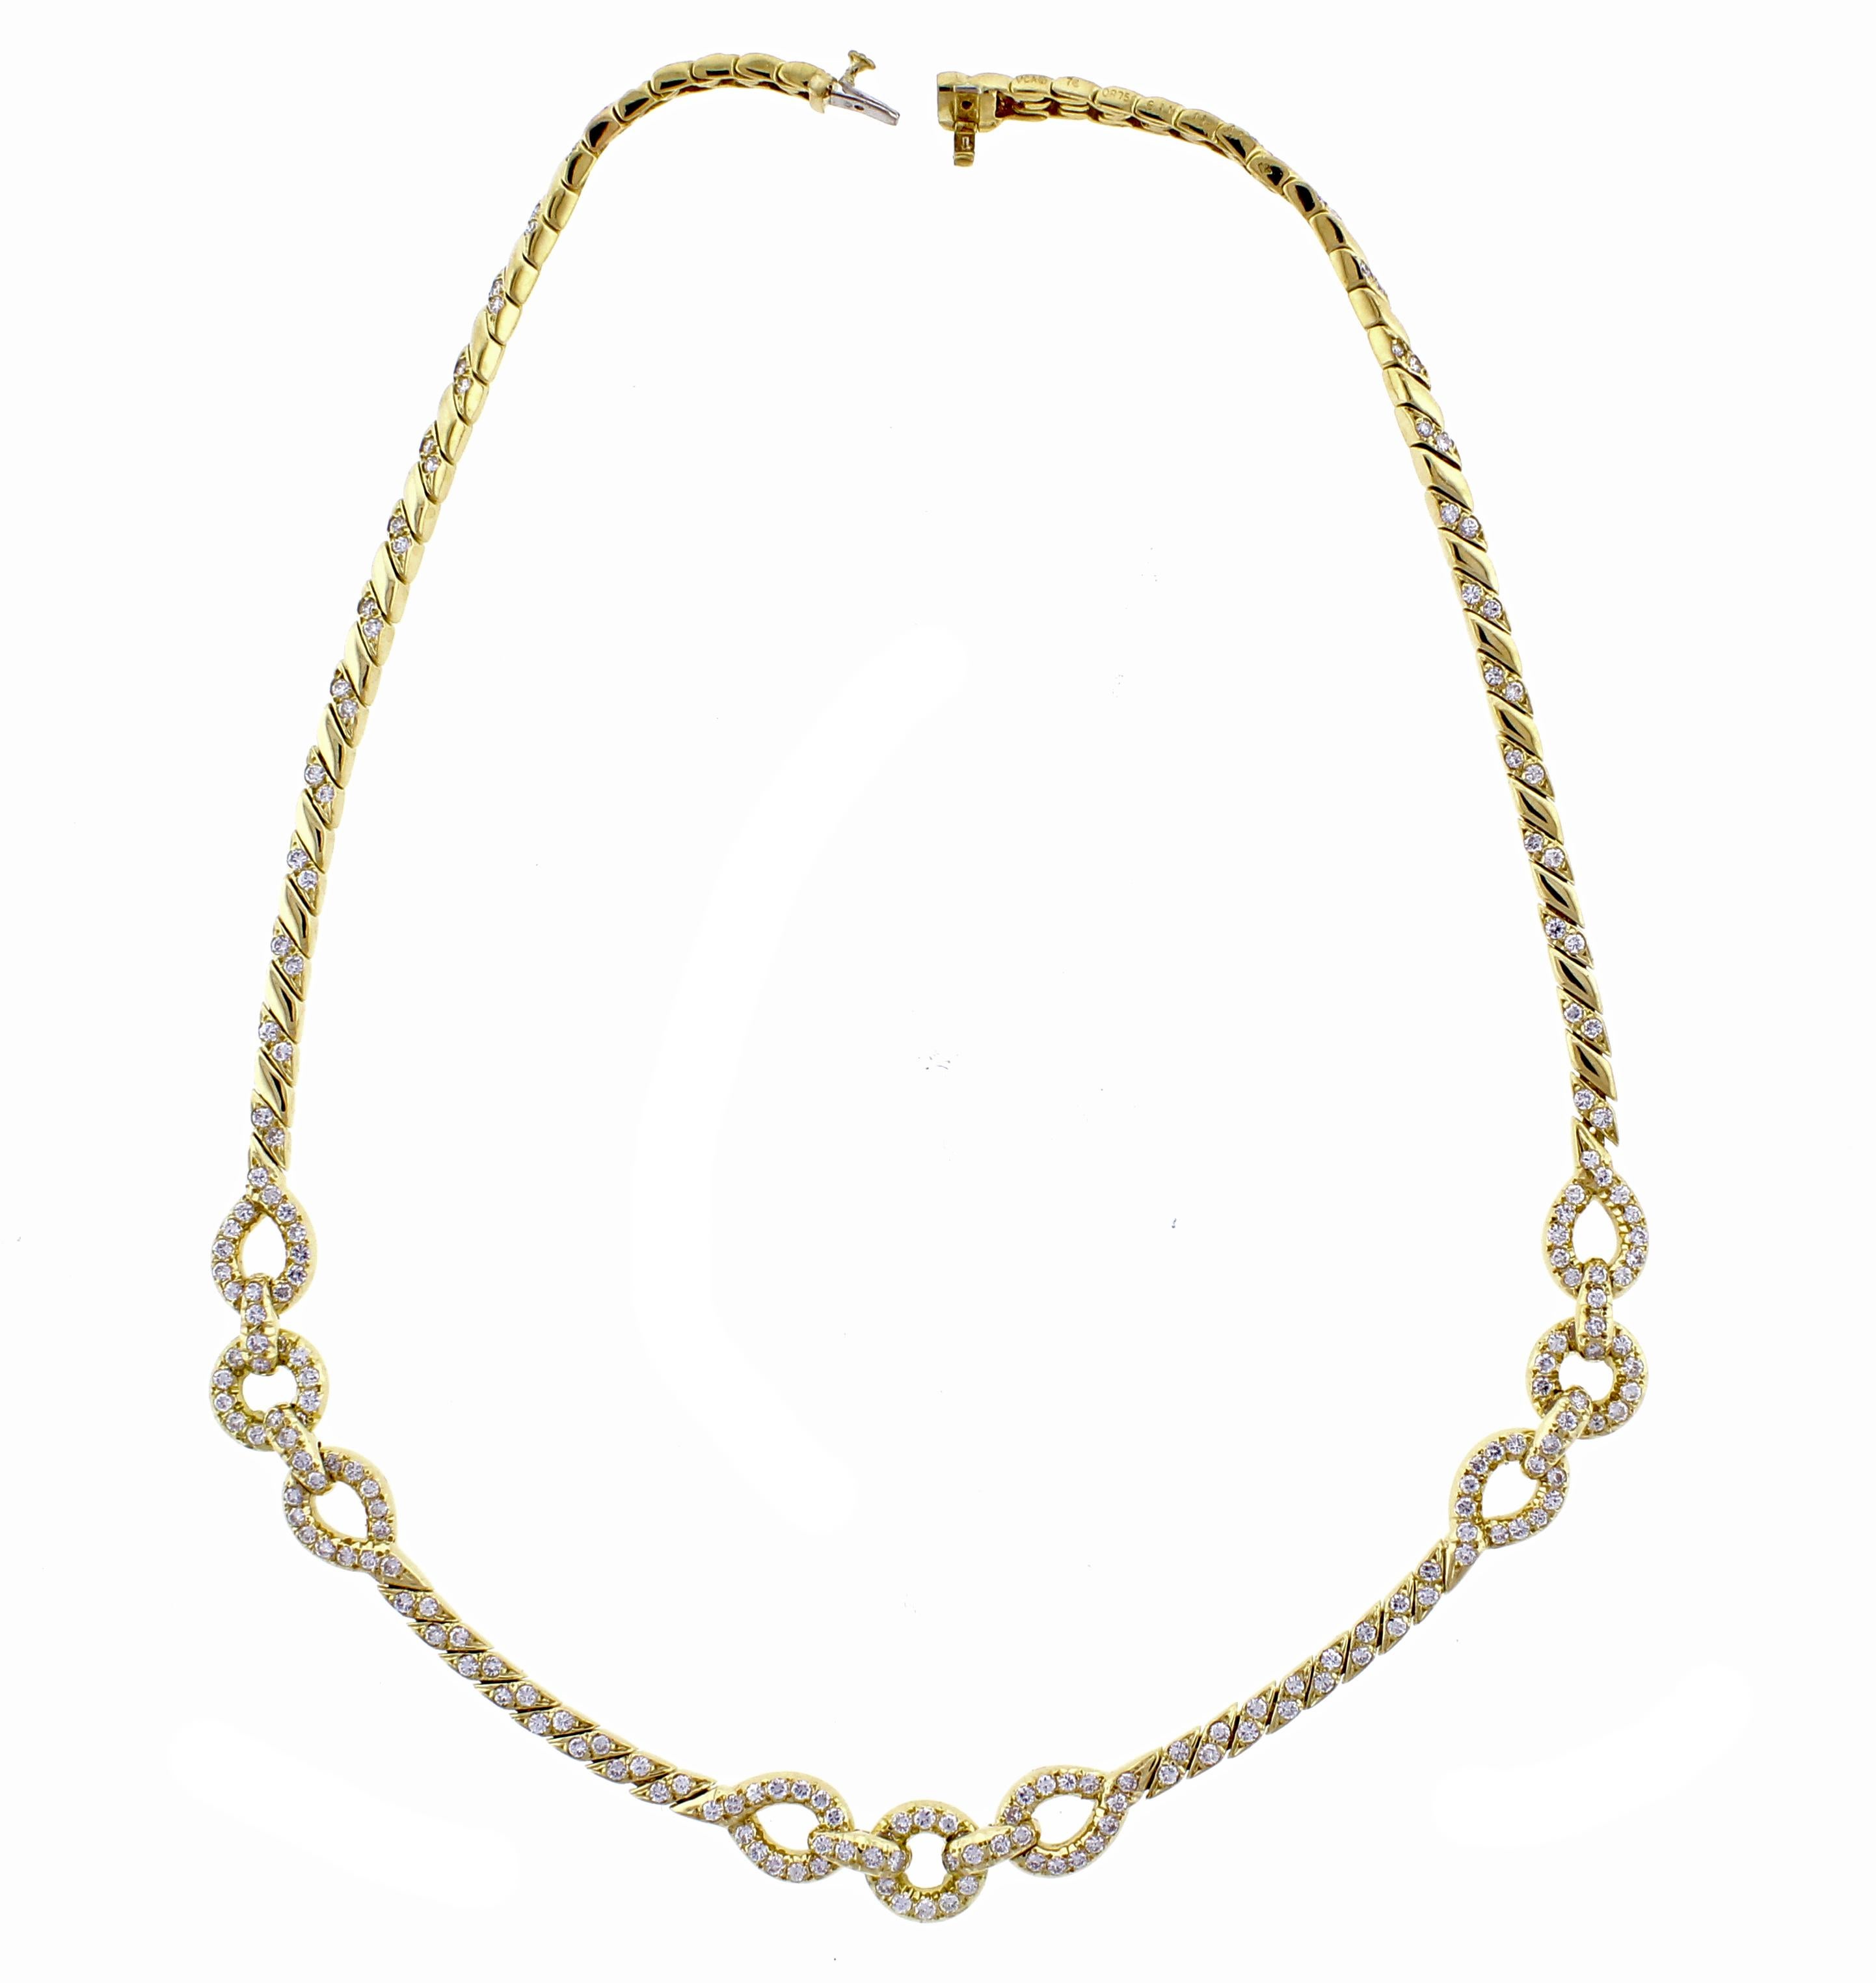 From  Van Cleef & Arpels, a diamond necklace. The 18 karat gold necklace features three sections each comprised of loops and circles among a braided diamond link. The braided link measures 4mm across, while the circles are 10mm The 214 brilliant